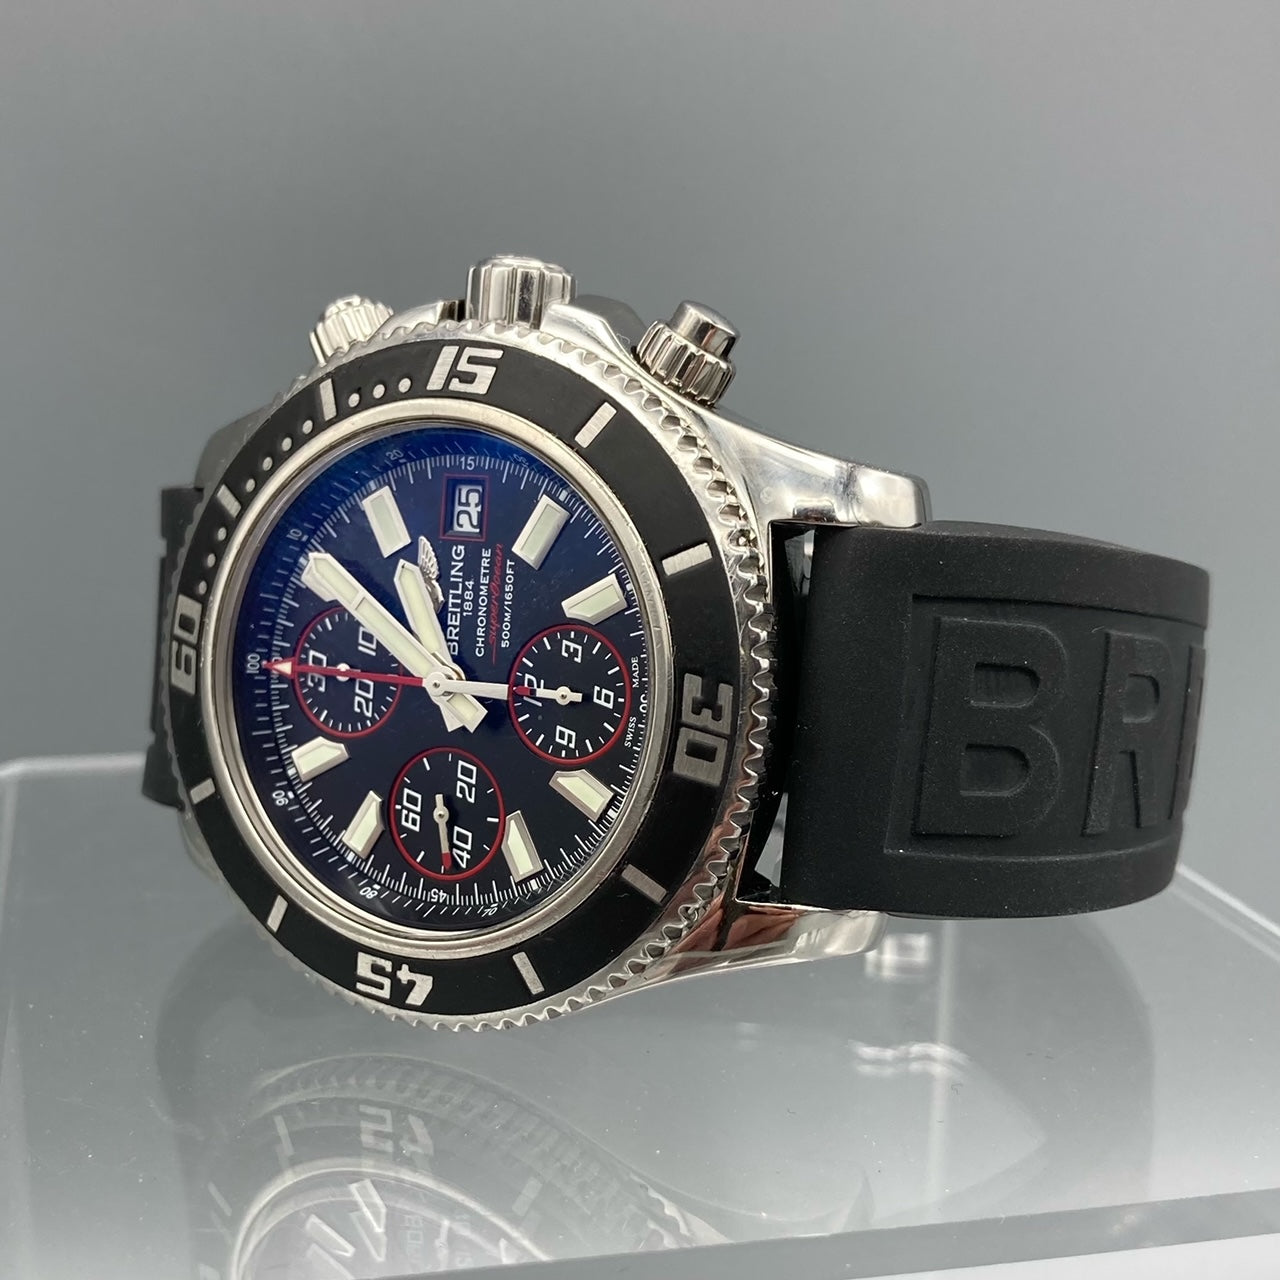 Breitling Automatic SuperOcean Chronograph Watch A13341